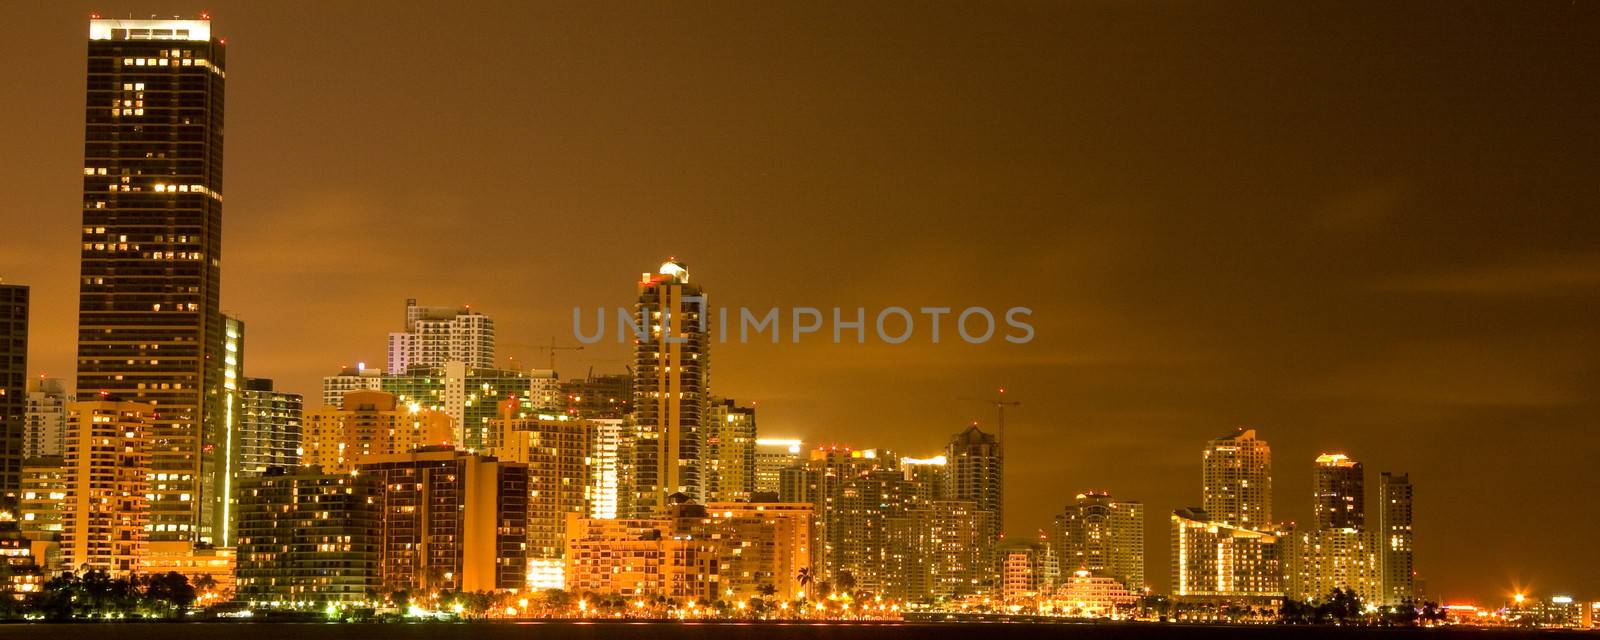 Illuminated commercial buildings at night in downtown Miami, USA.